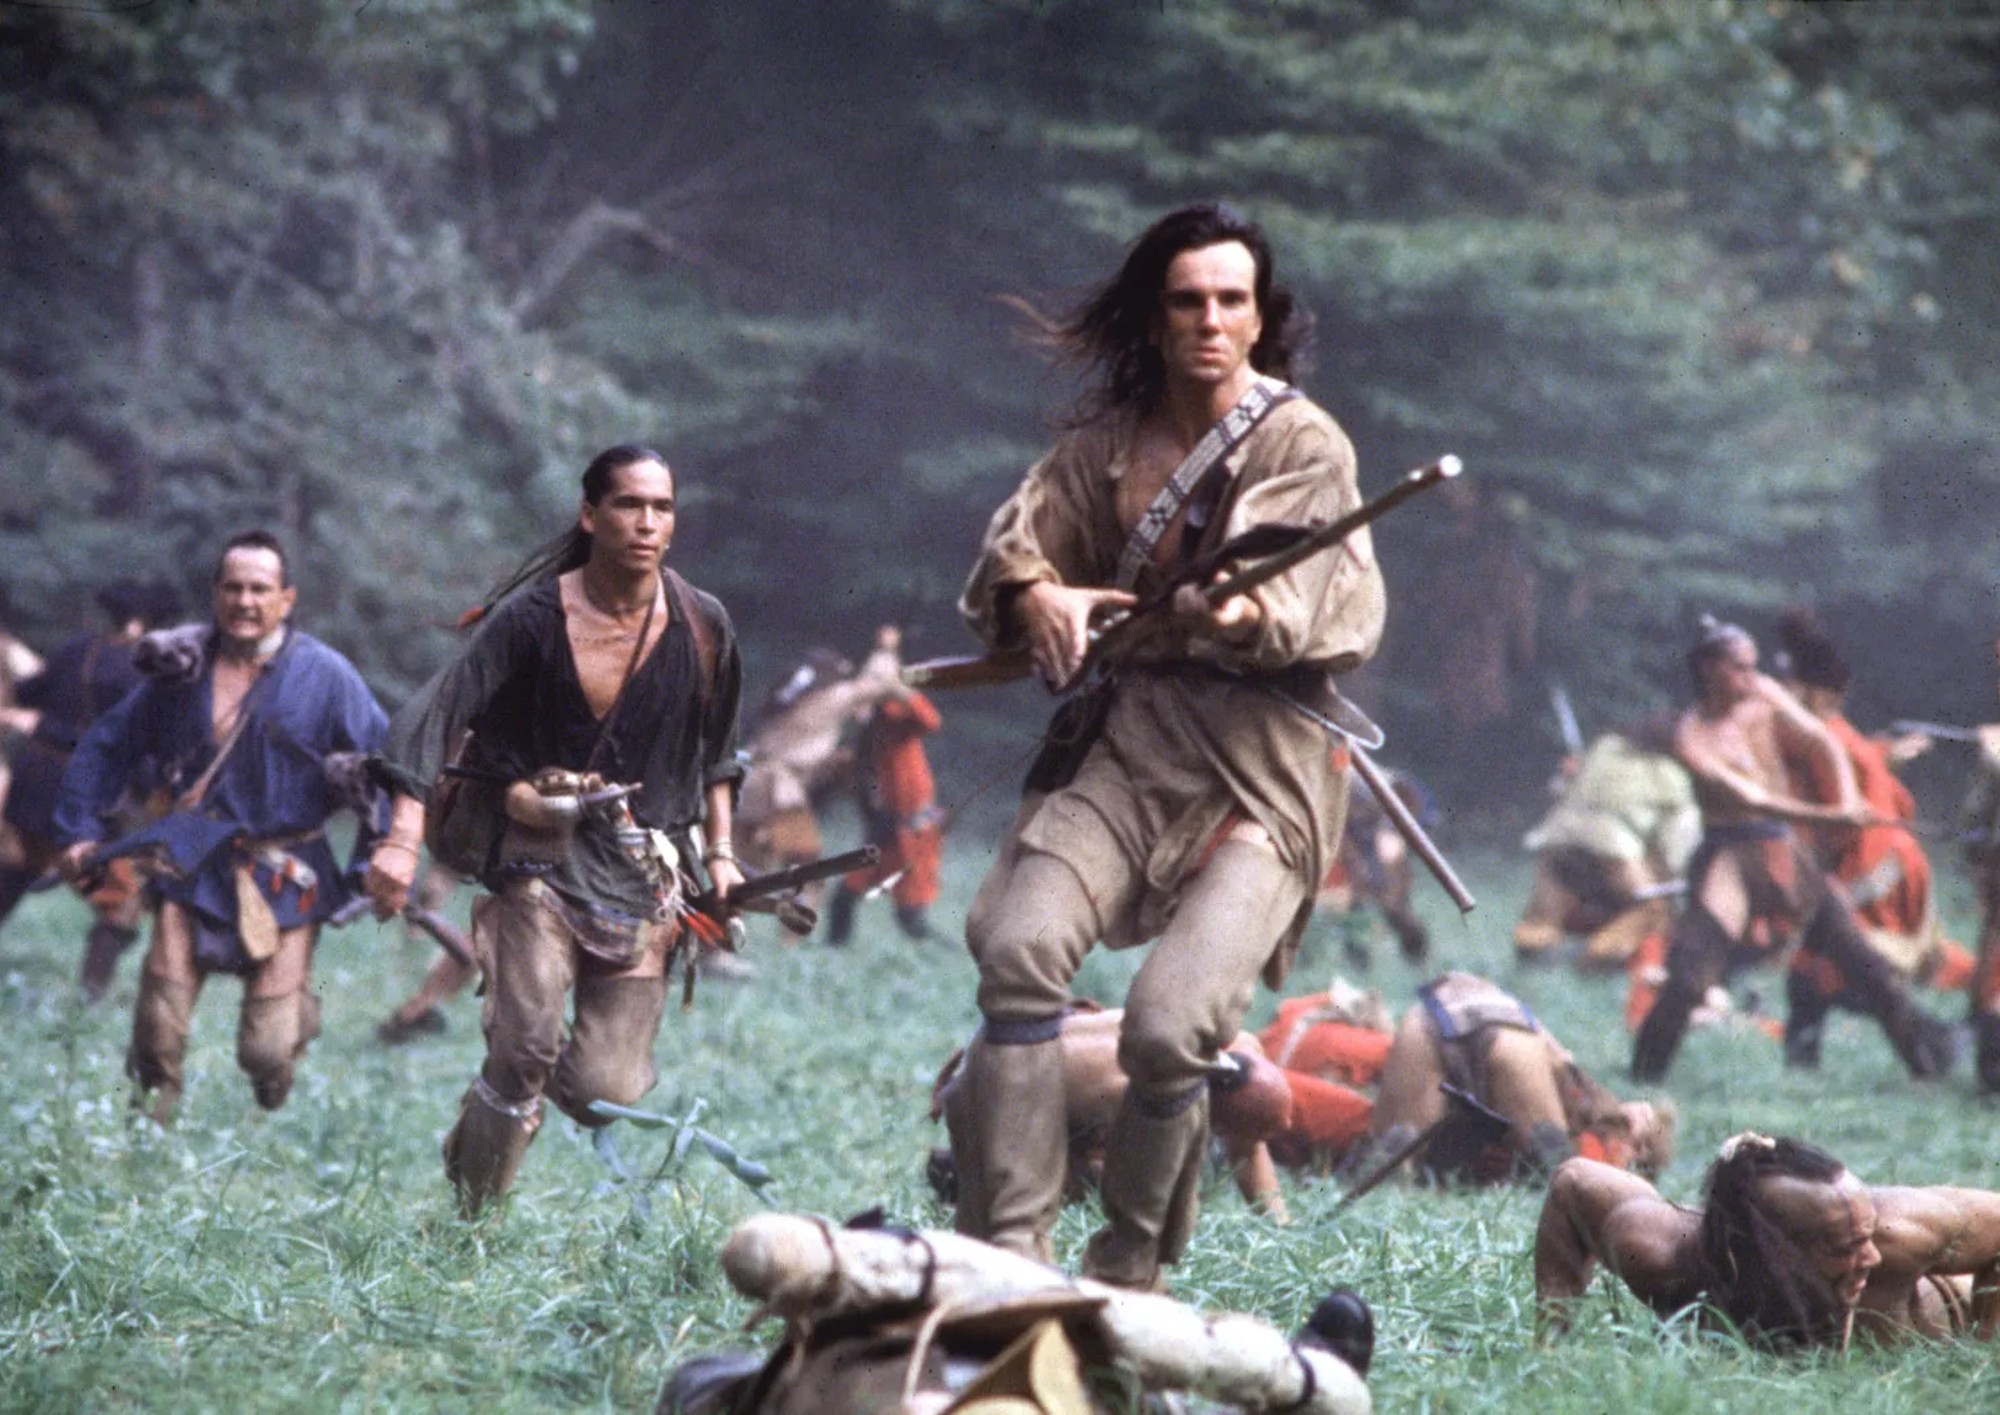 Image from the motion picture The Last of The Mohicans